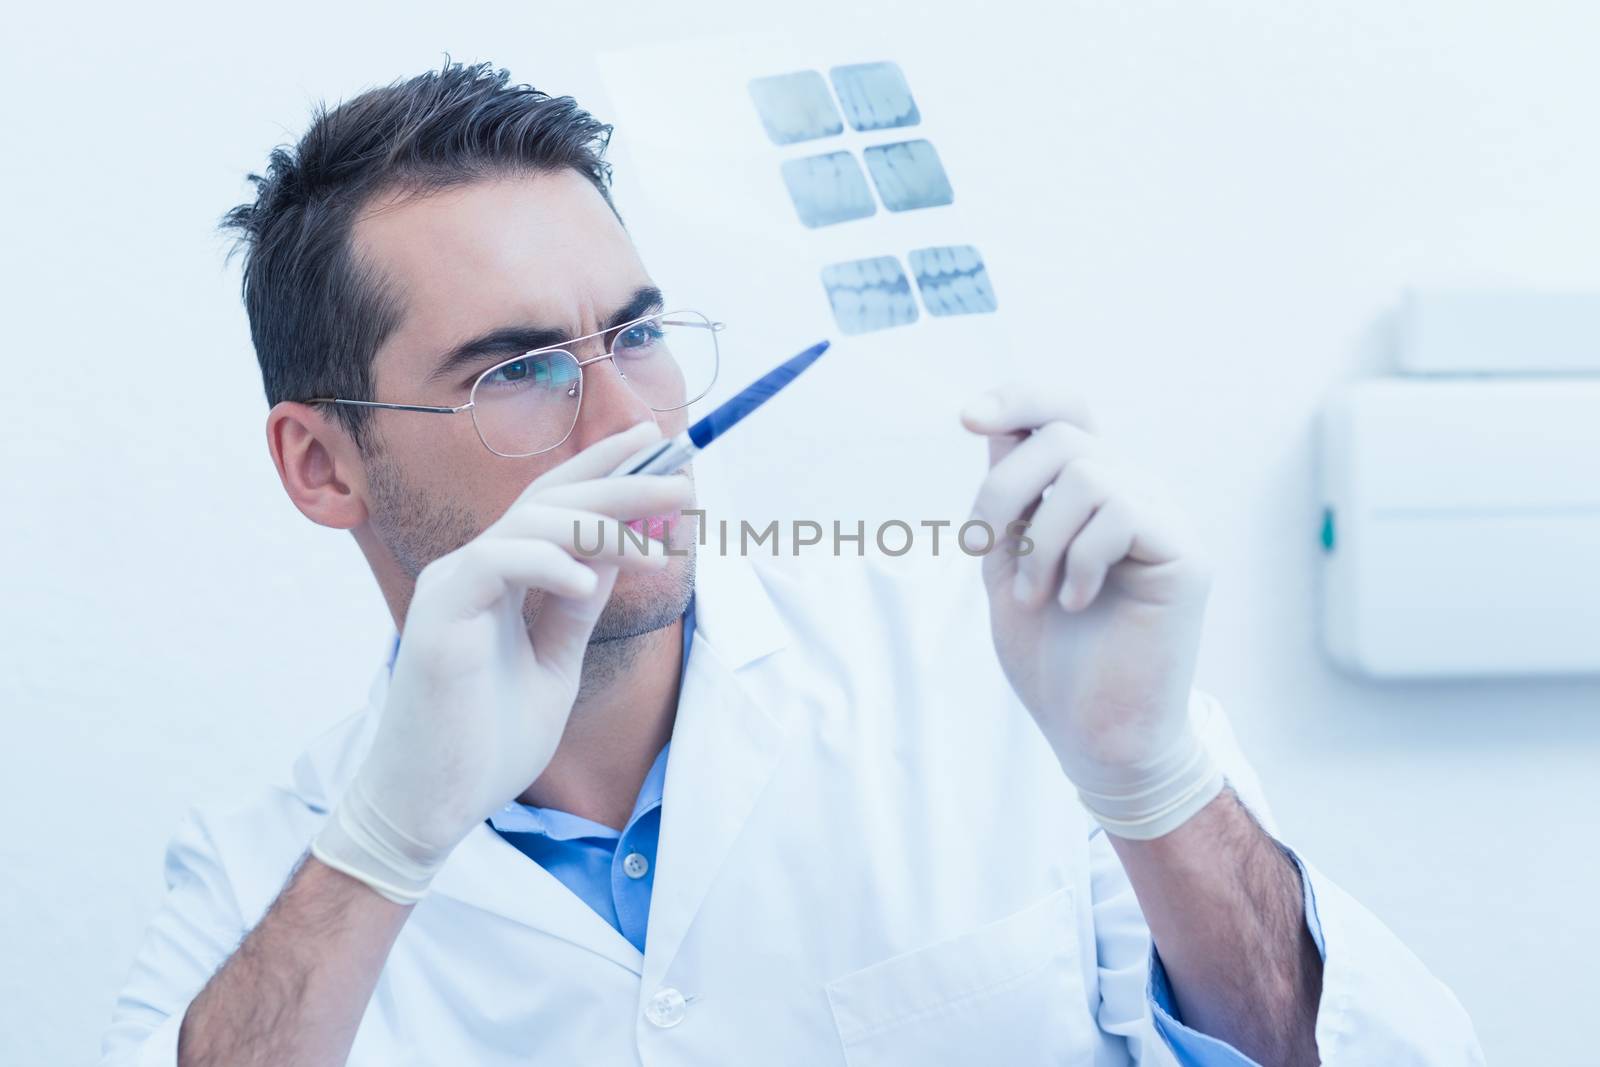 Concentrated male dentist looking at x-ray